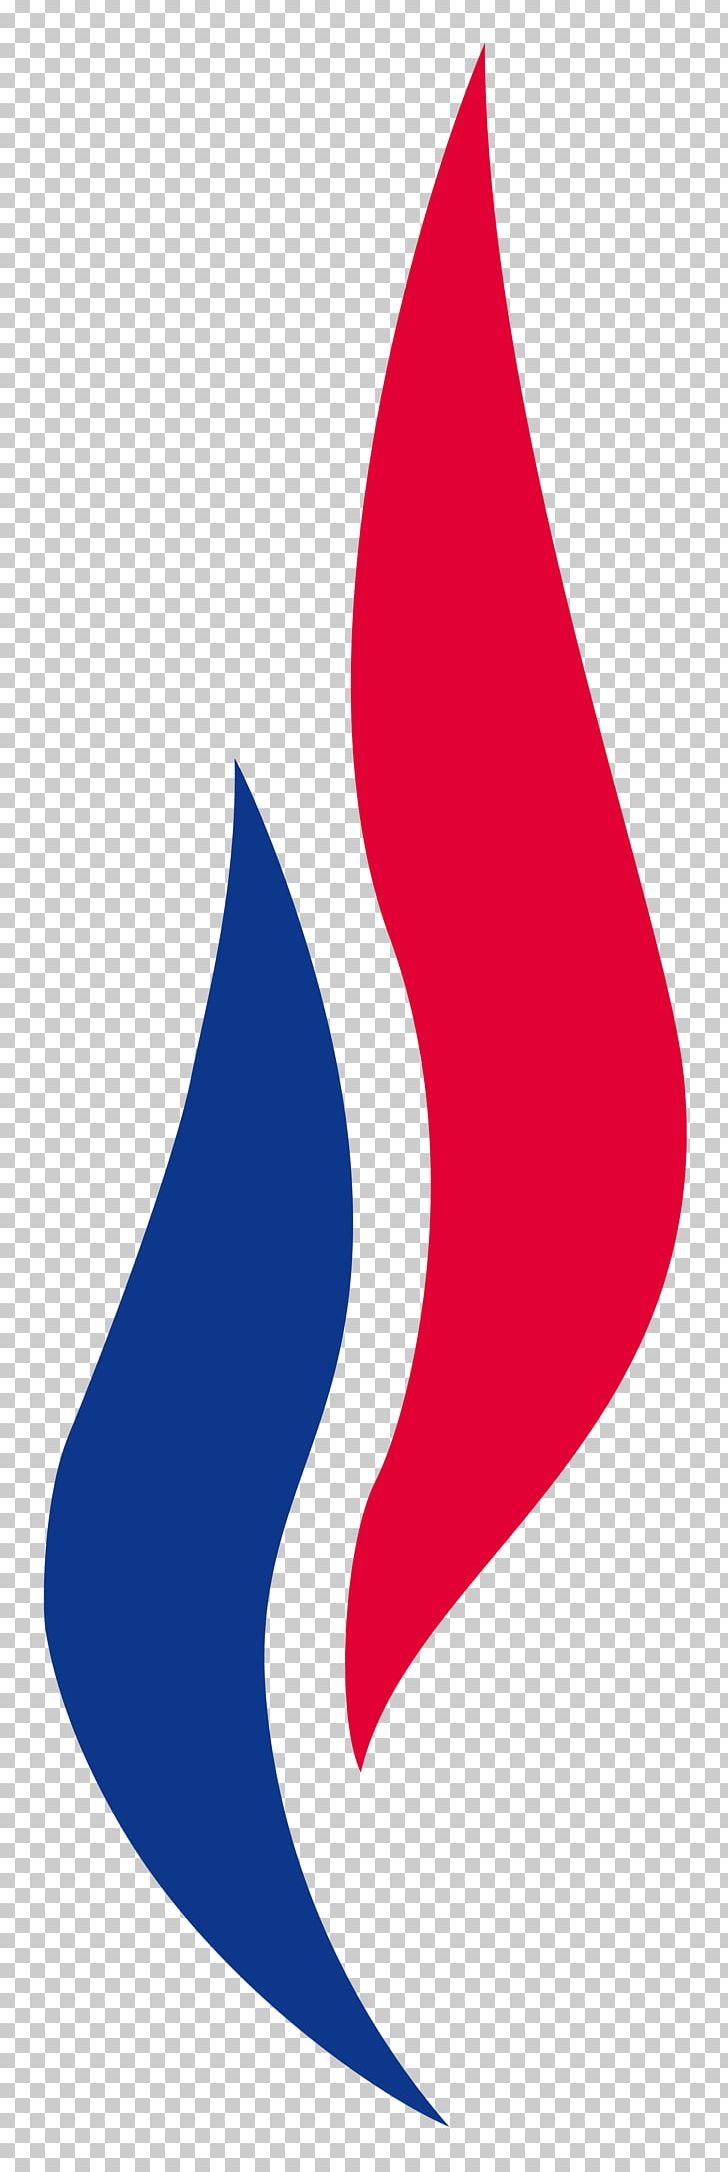 France National Front Political Party Far-right Politics Logo PNG, Clipart, Election, Farright Politics, Florian Philippot, France, Jeanmarie Le Pen Free PNG Download